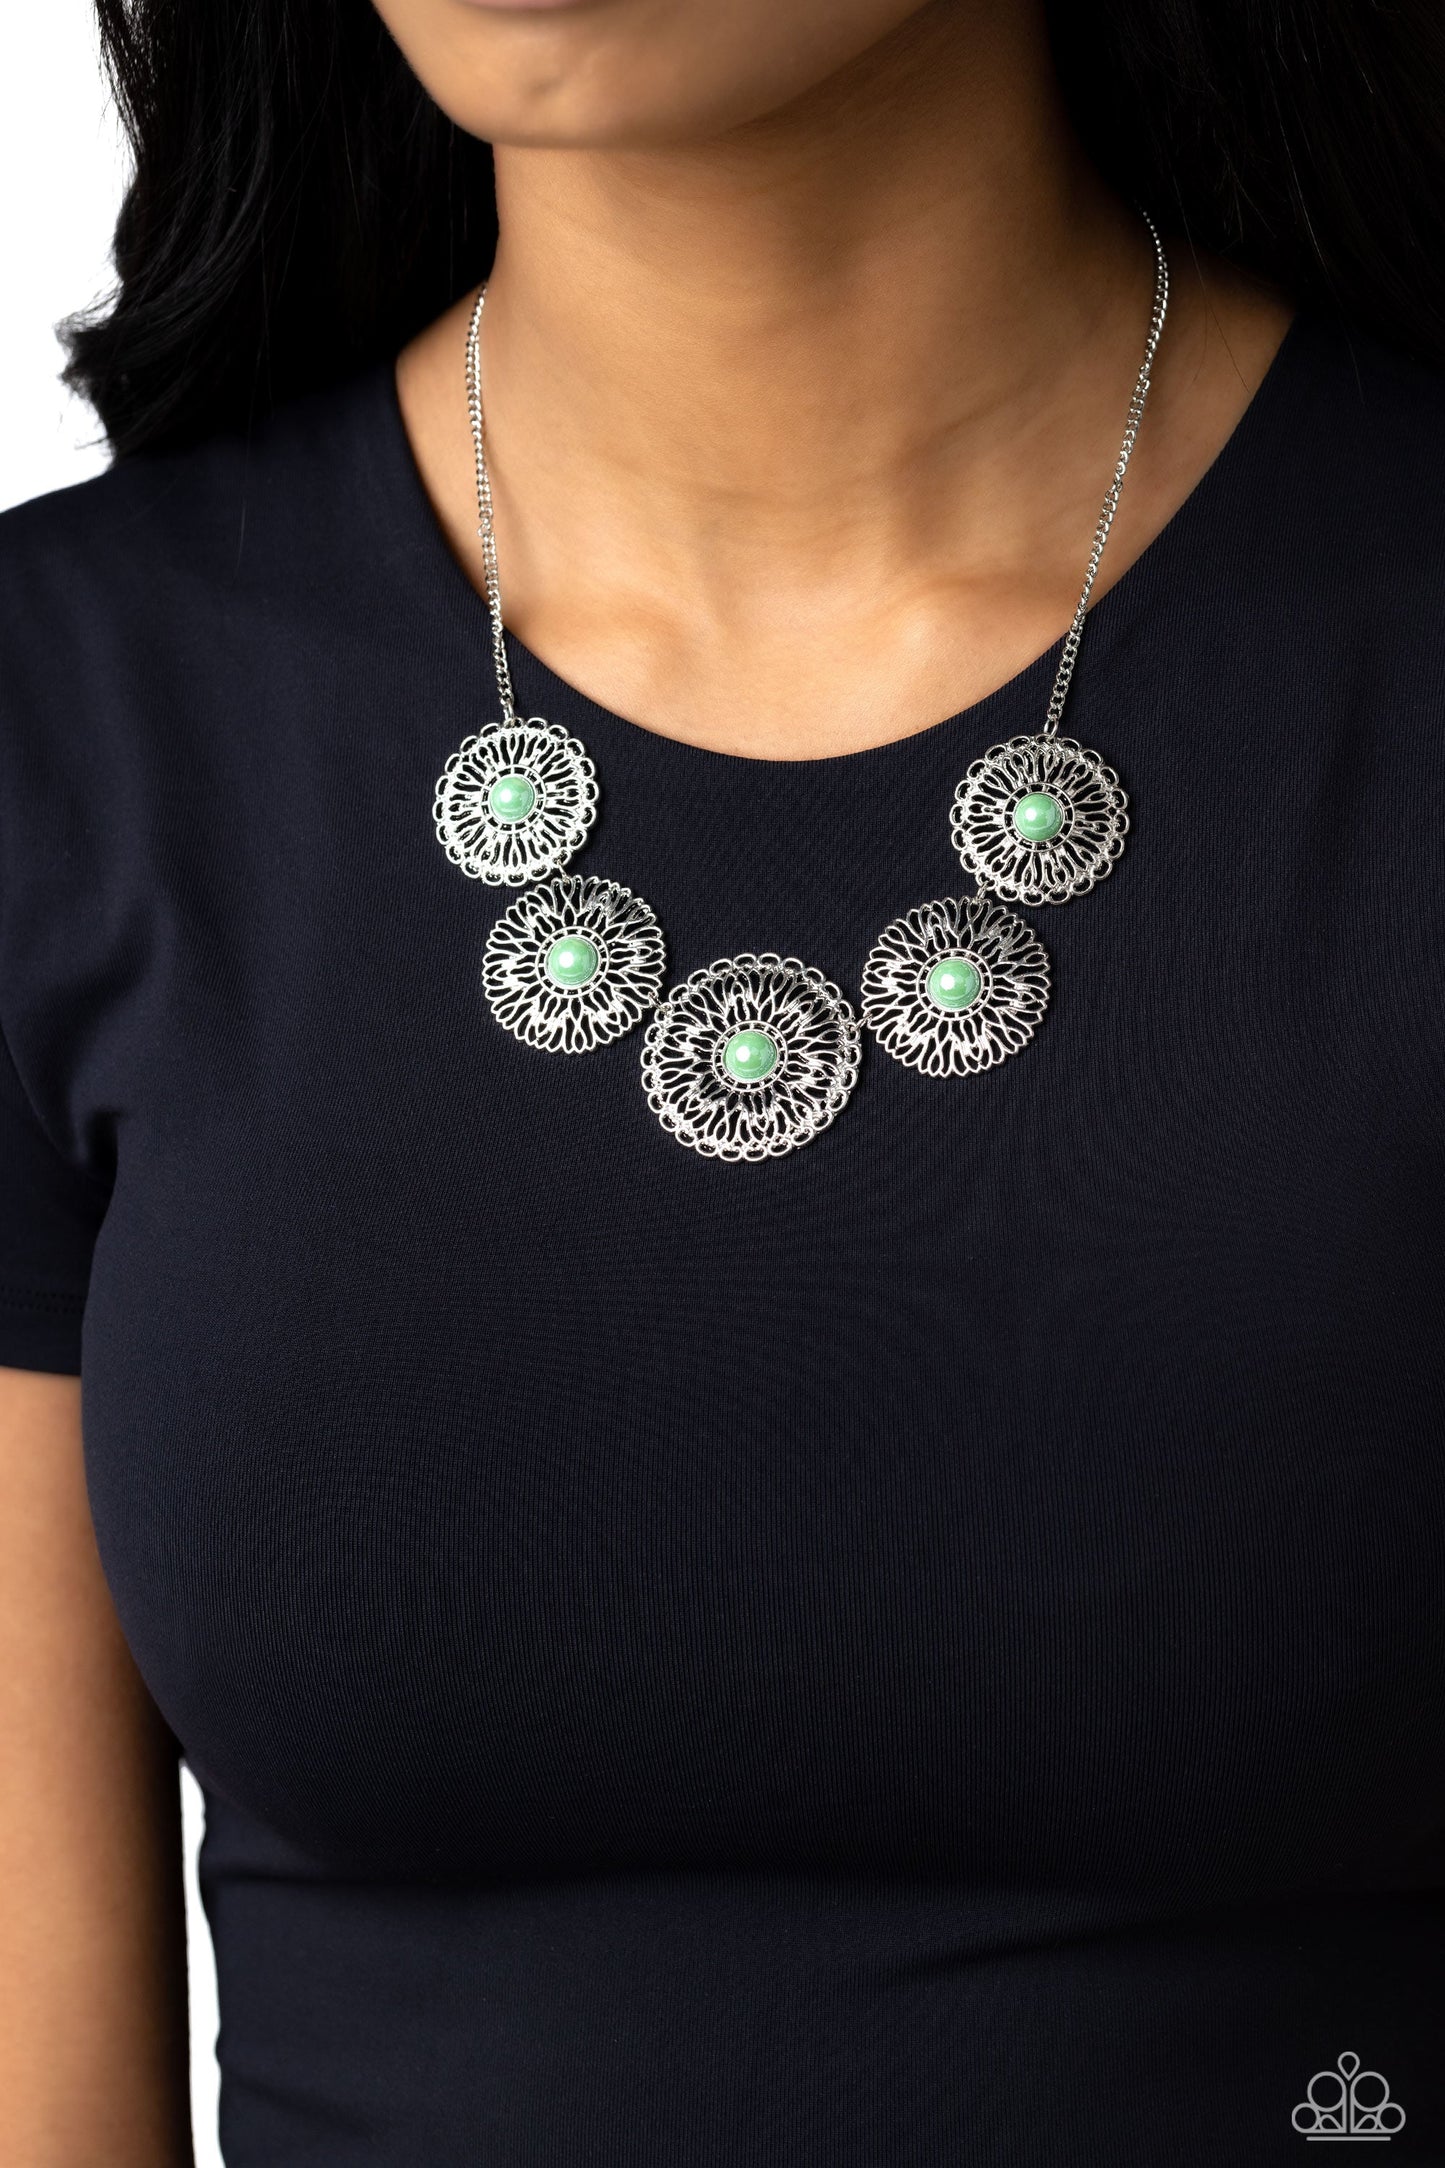 Chrysanthemum Craze - Green Beaded Centers/Tactile Silver Petals Paparazzi Necklace & matching earrings